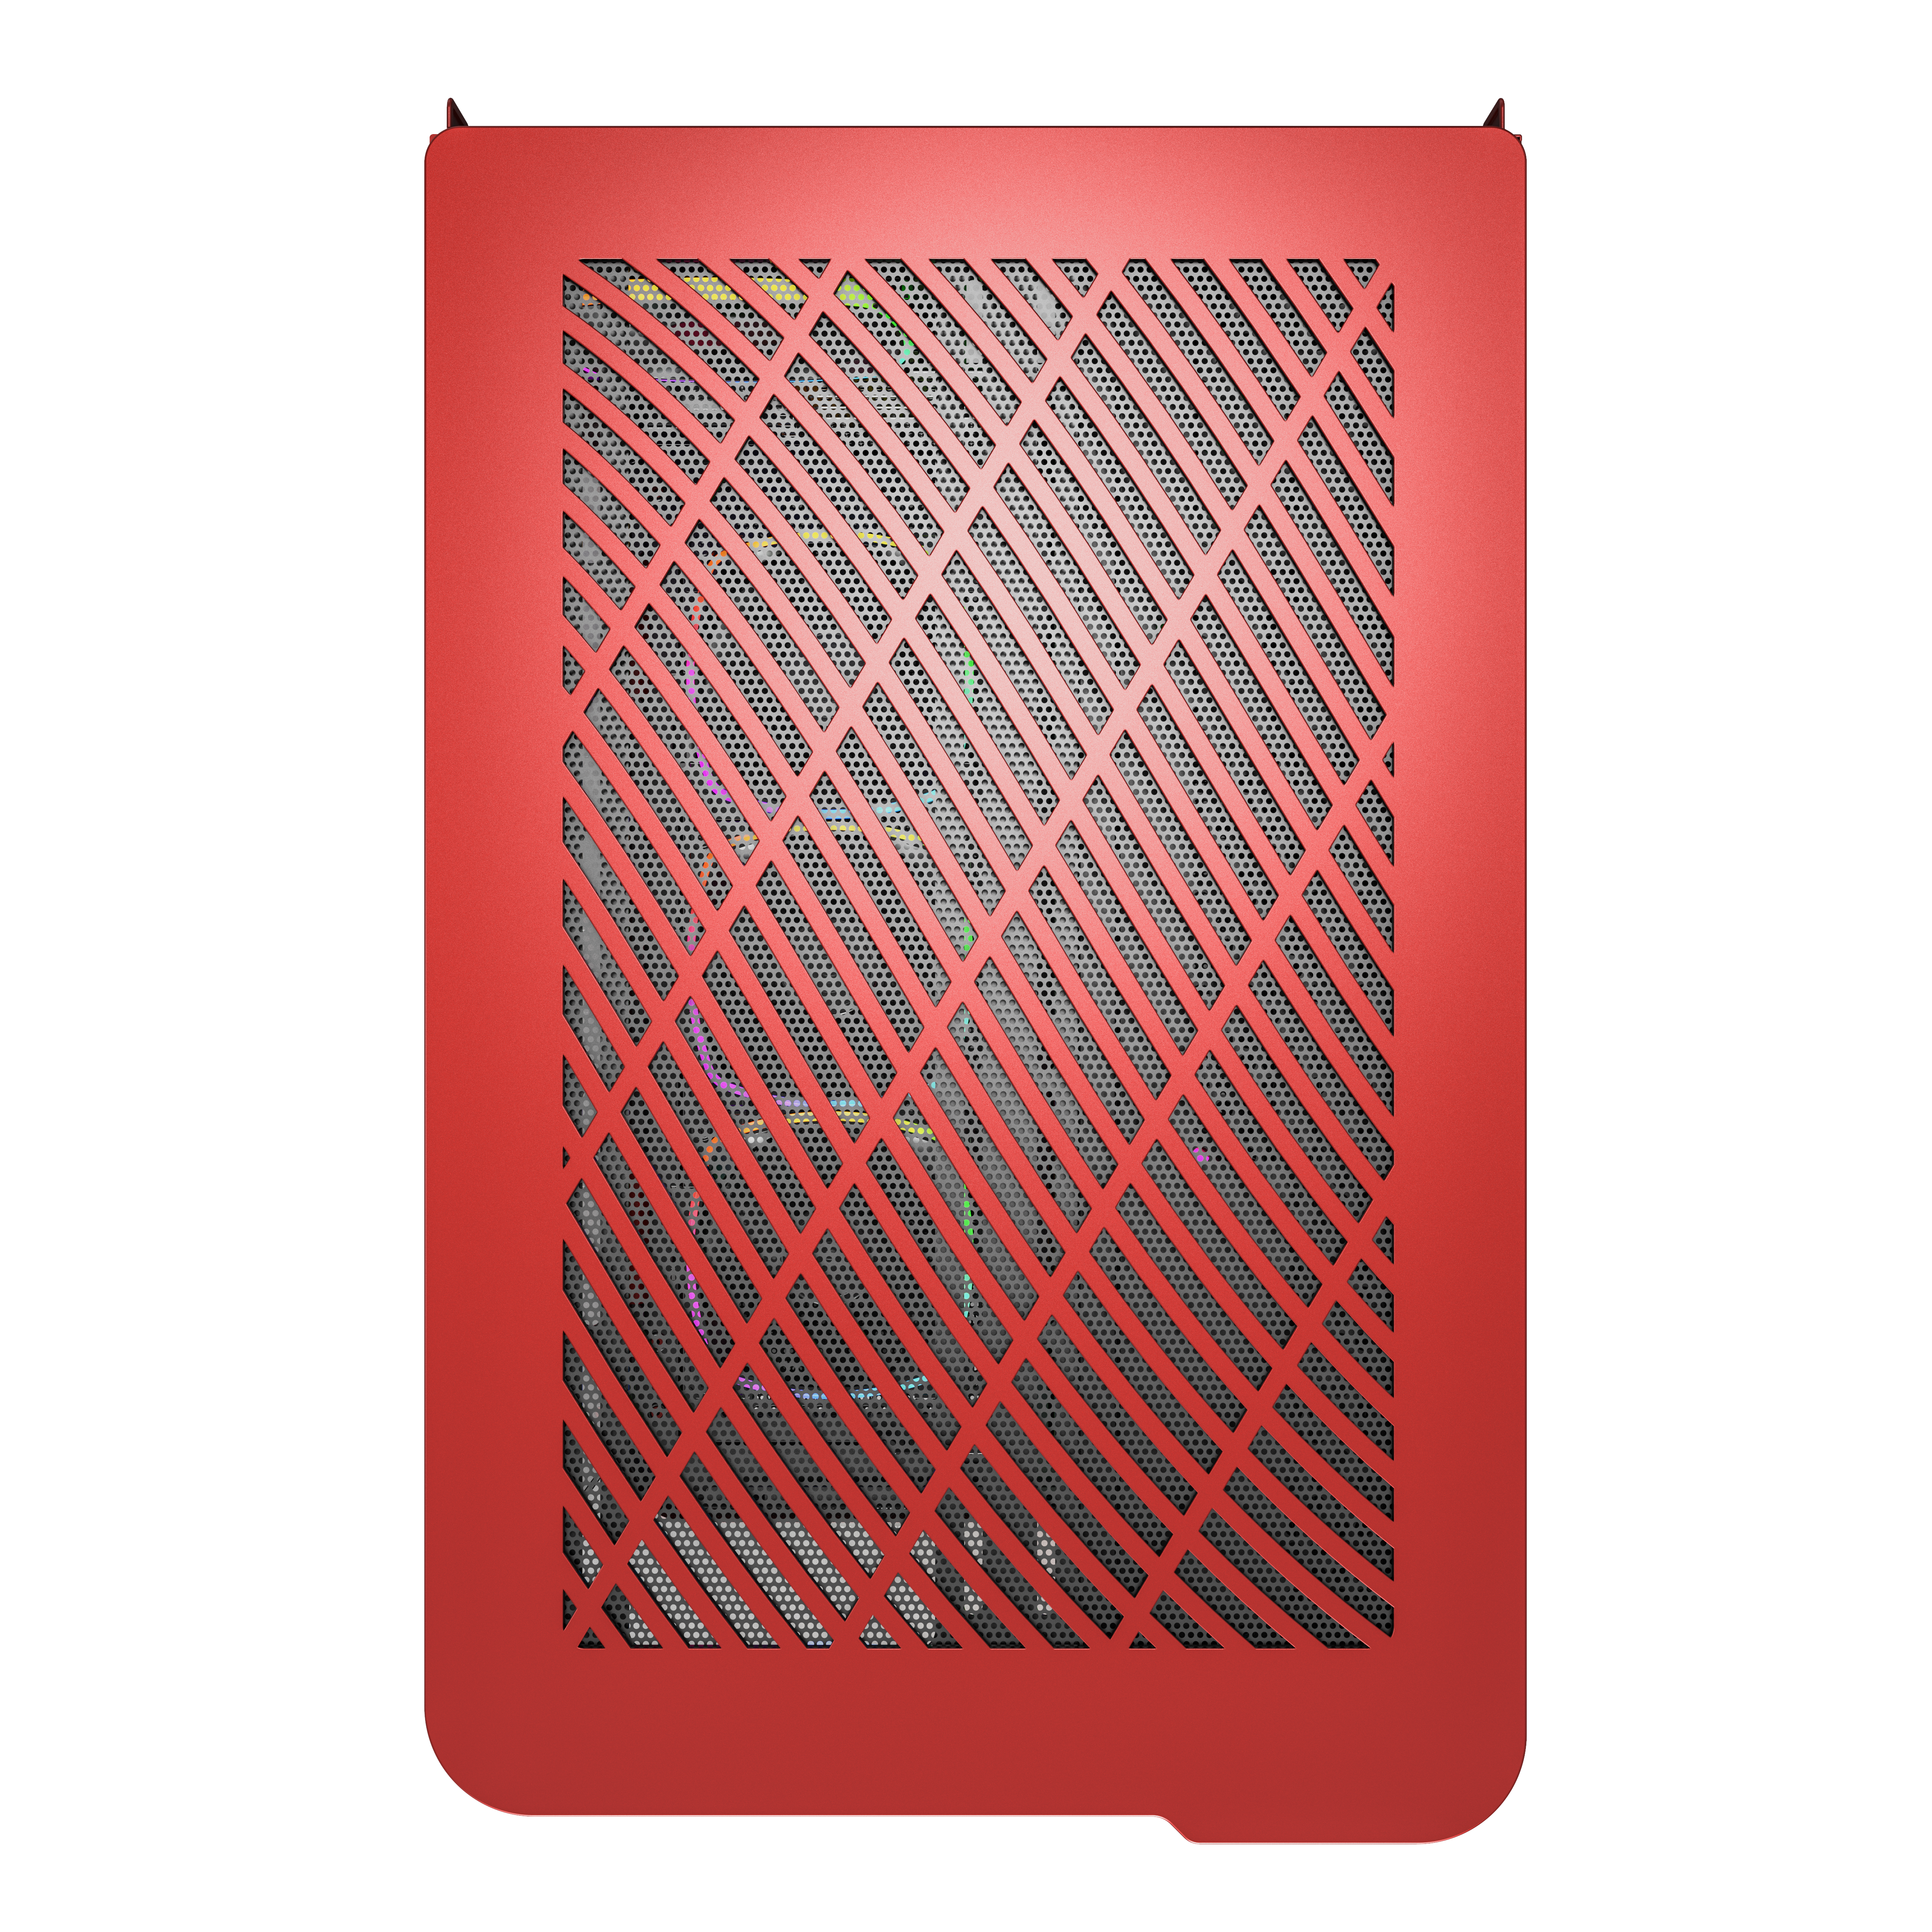 montech - Montech KING 95 PRO Midi-Tower, Tempered Glass, ARGB - Red